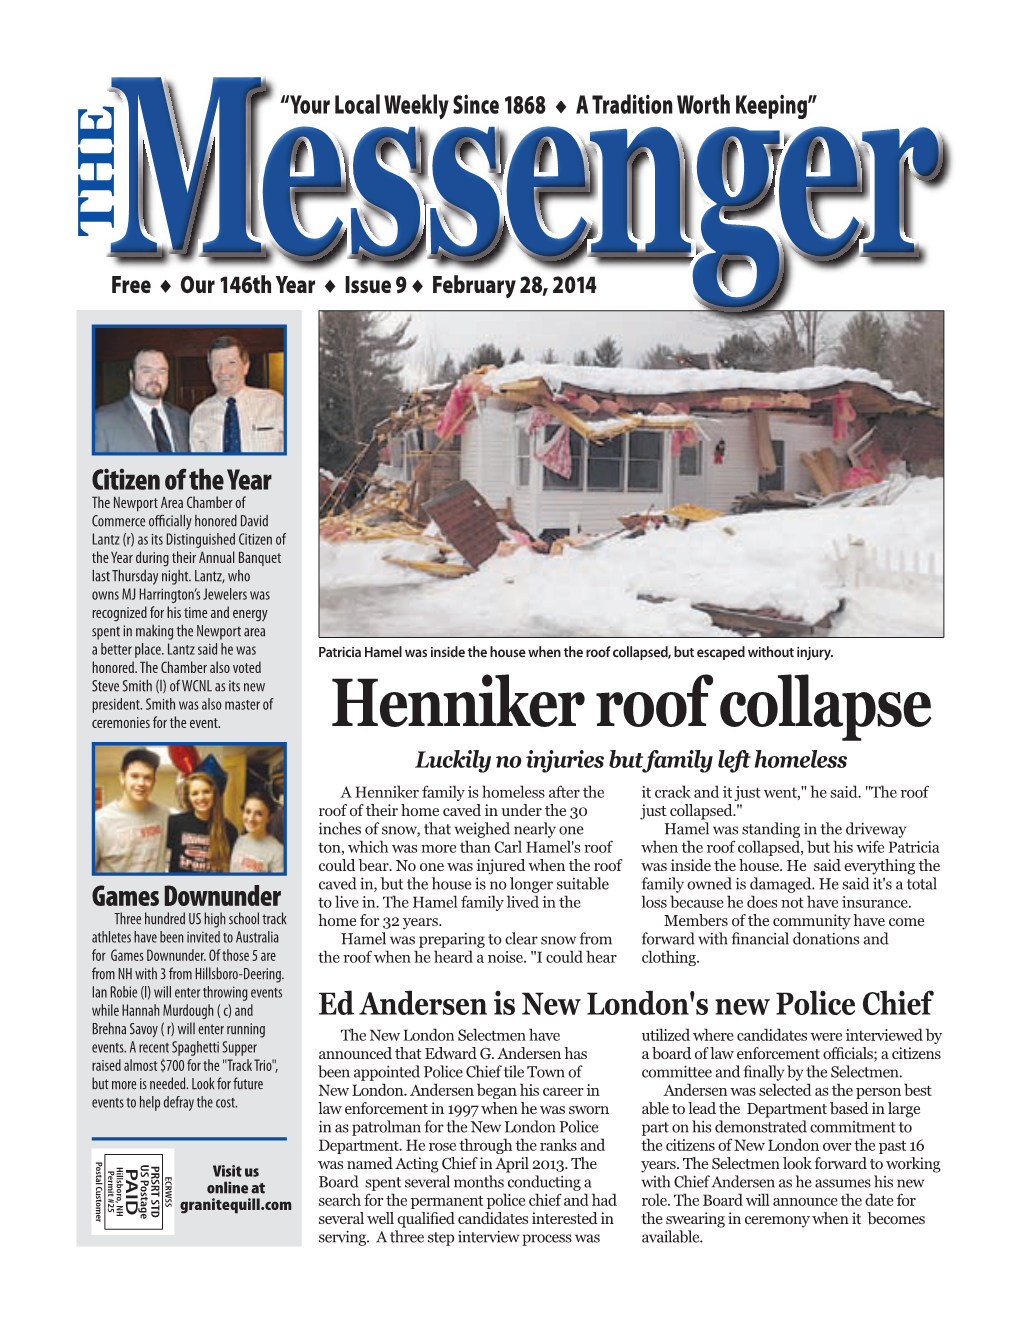 Henniker Roof Collapse Luckily No Injuries but Family Left Homeless a Henniker Family Is Homeless After the It Crack and It Just Went," He Said